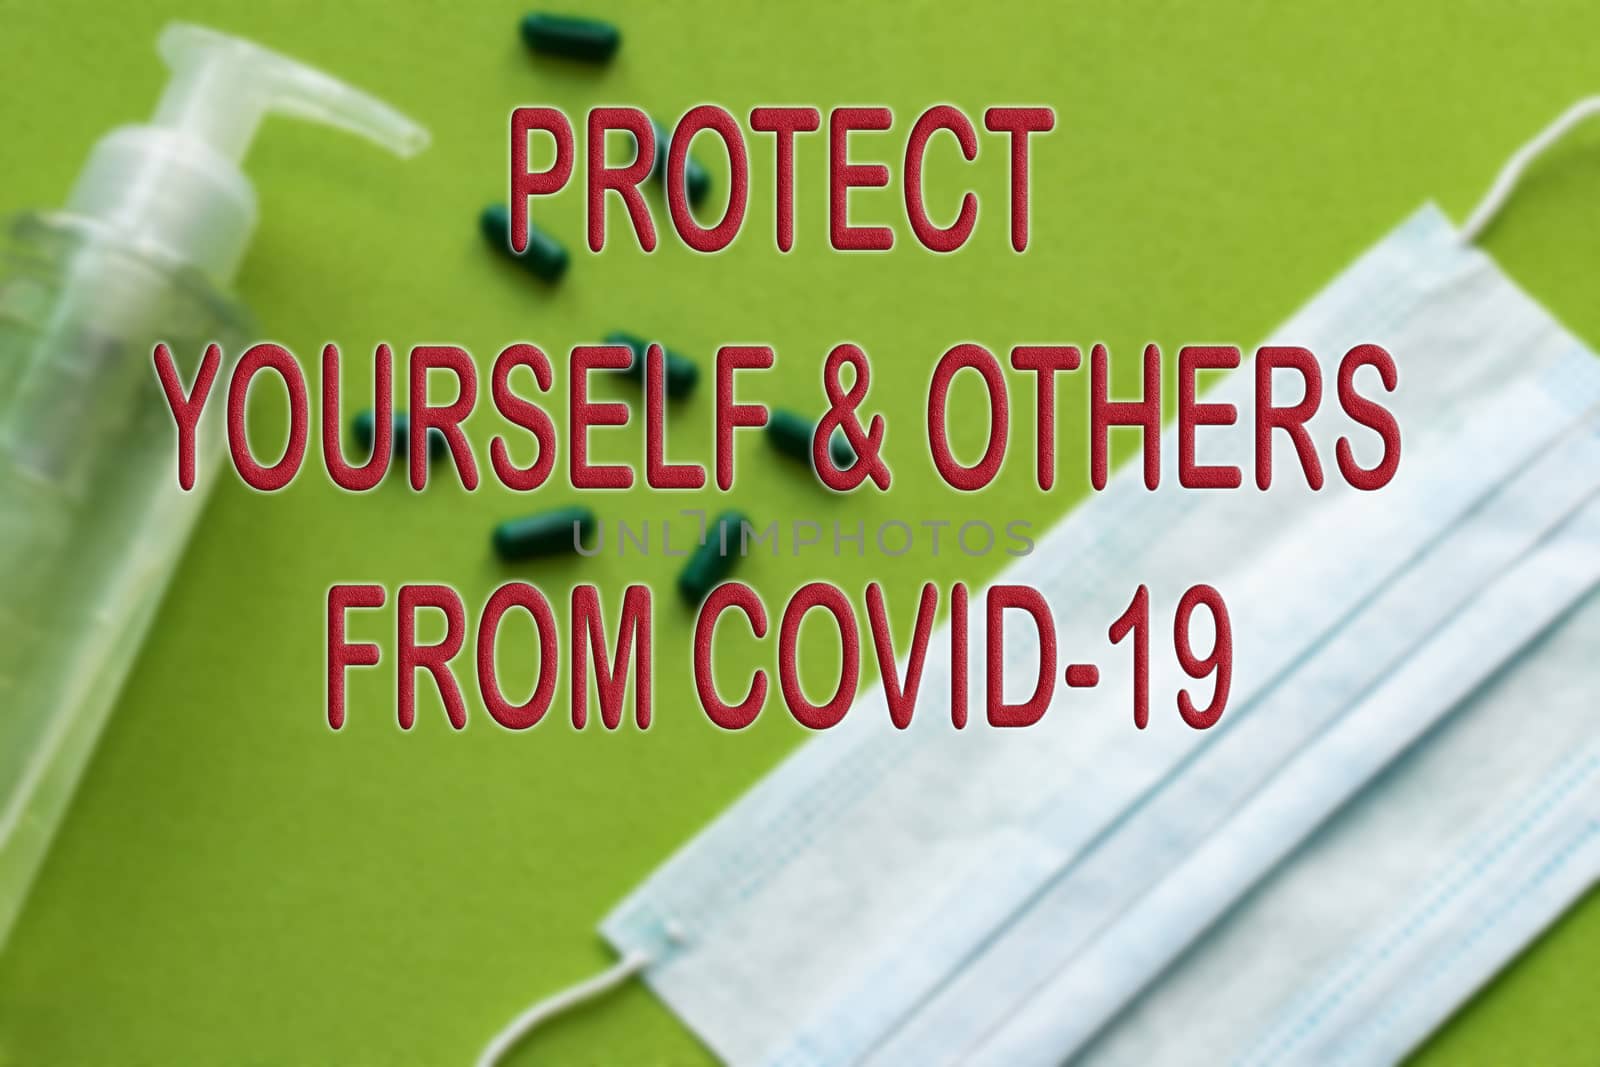 Text about prevention of coronavirus against a background of hand sanitizing gel and medical protective surgical mask on a green background. by bonilook